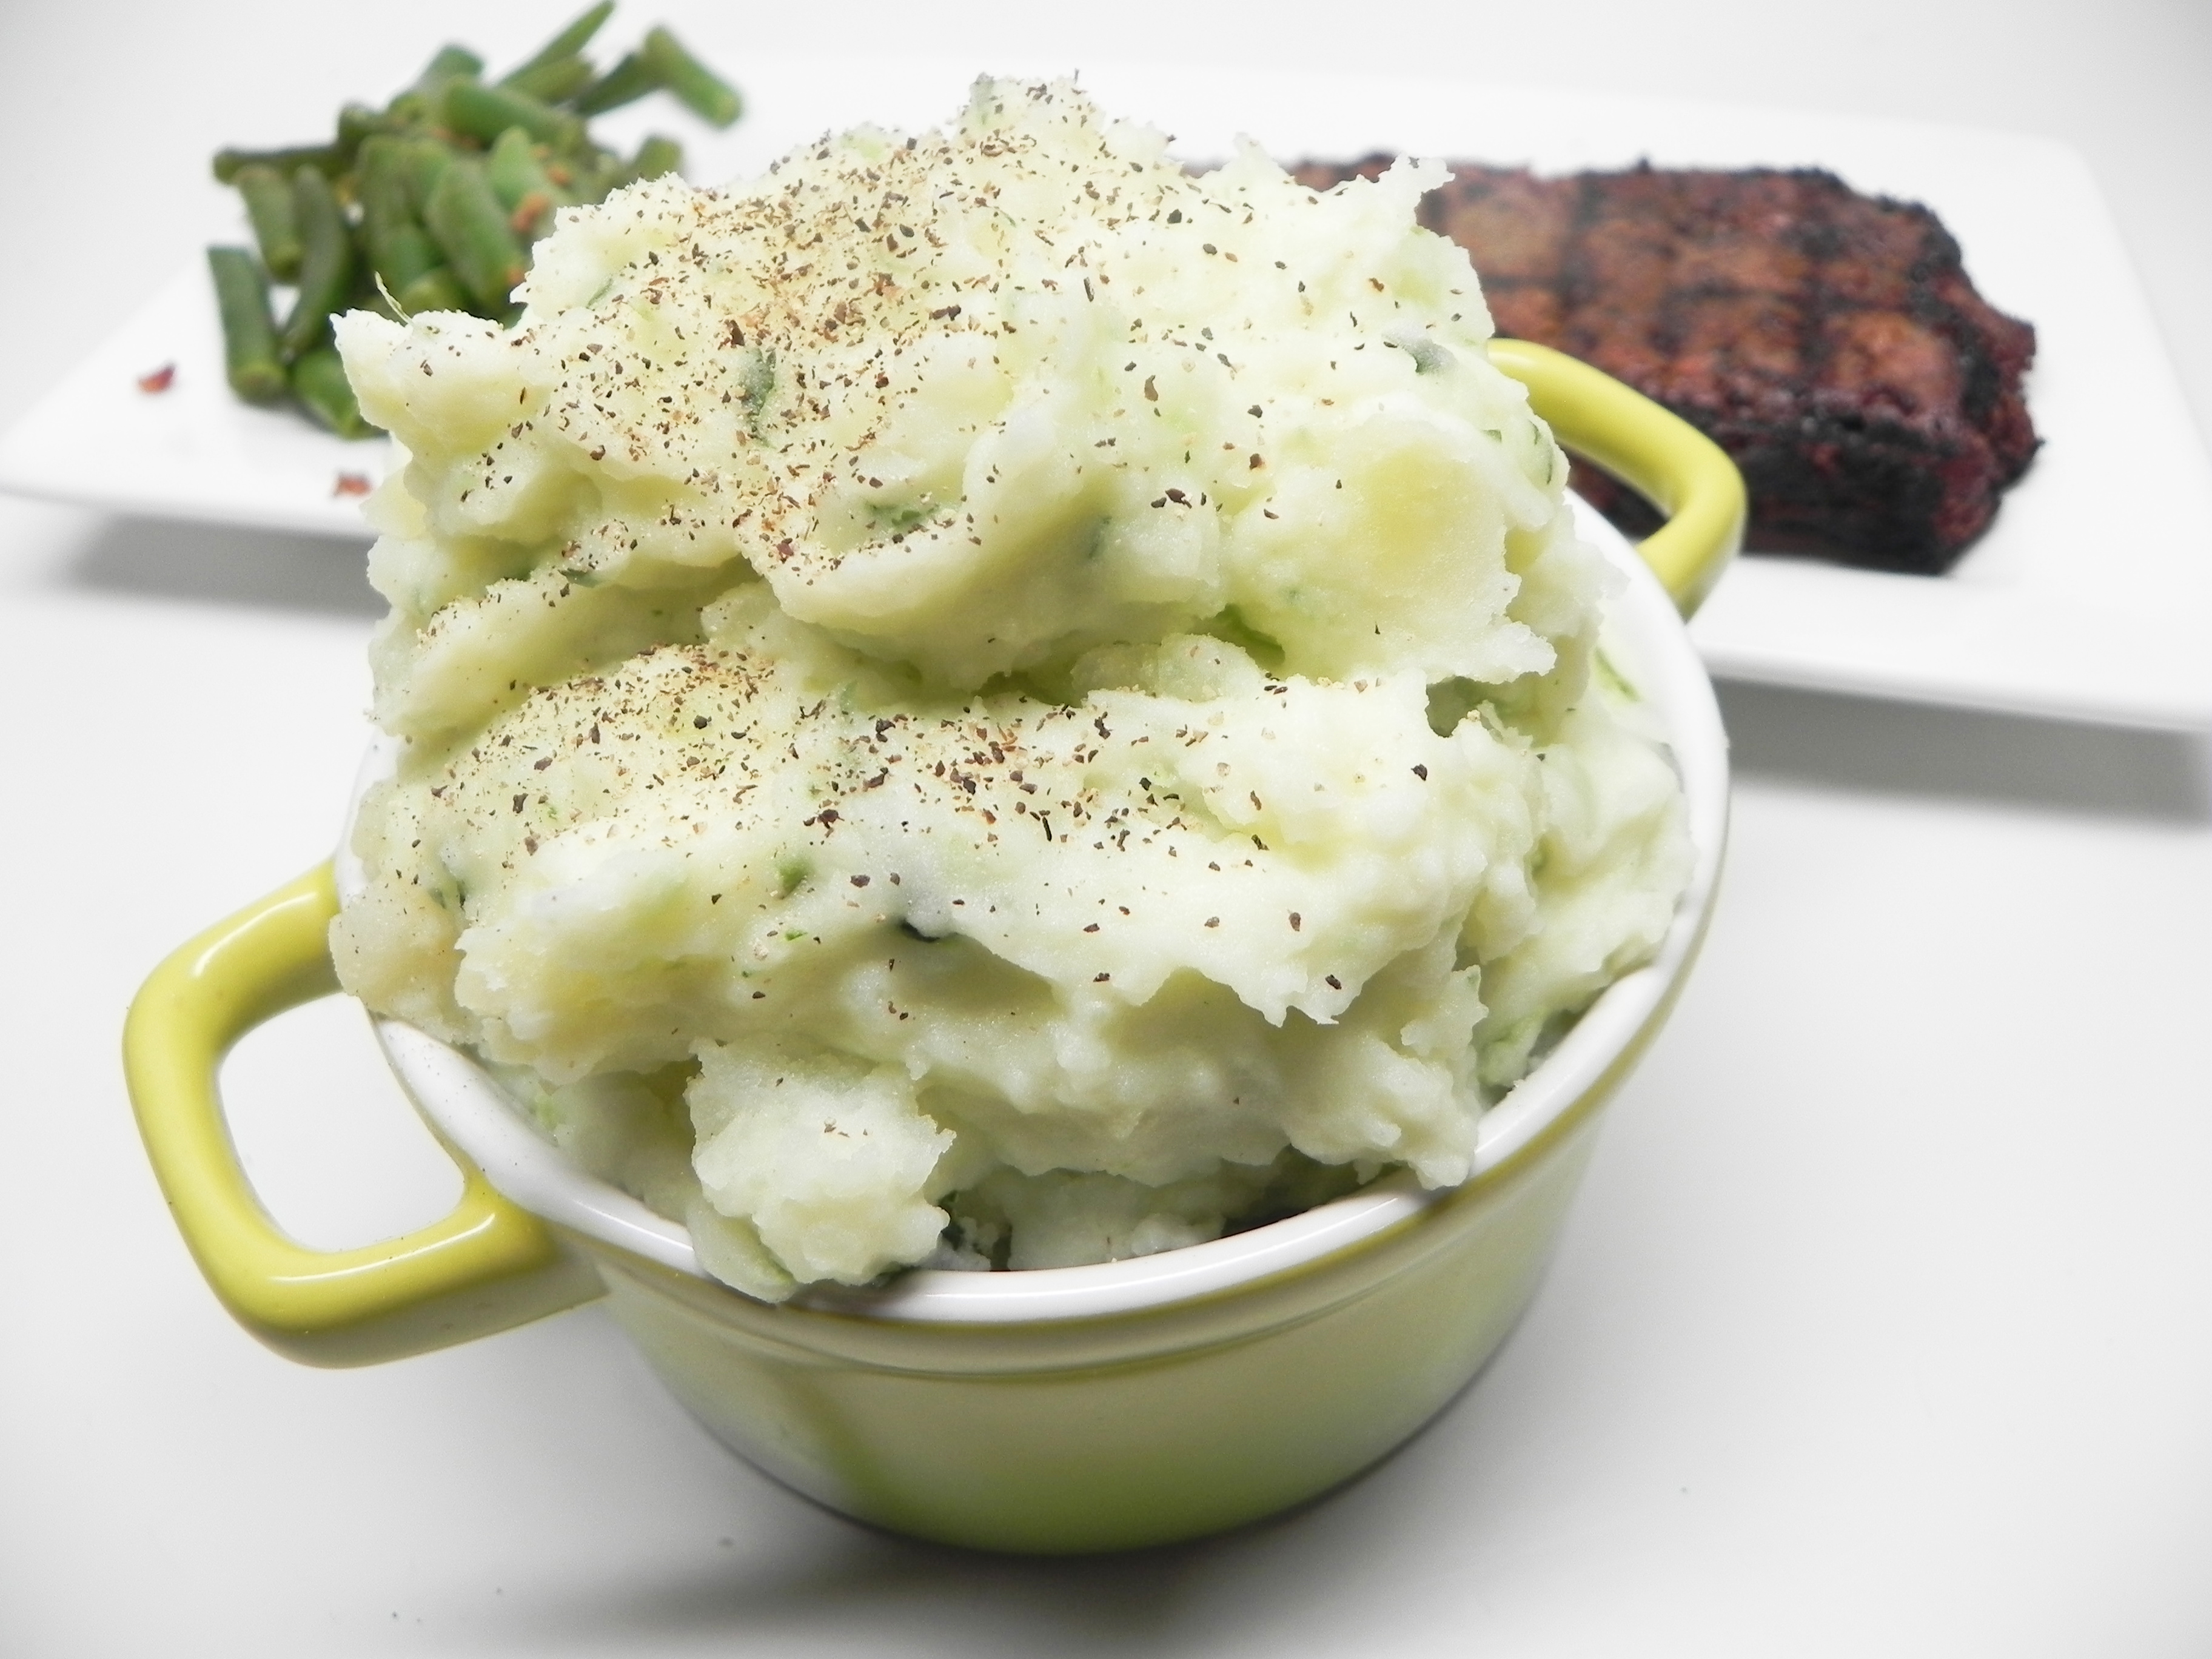 Spicy Mashed Potatoes